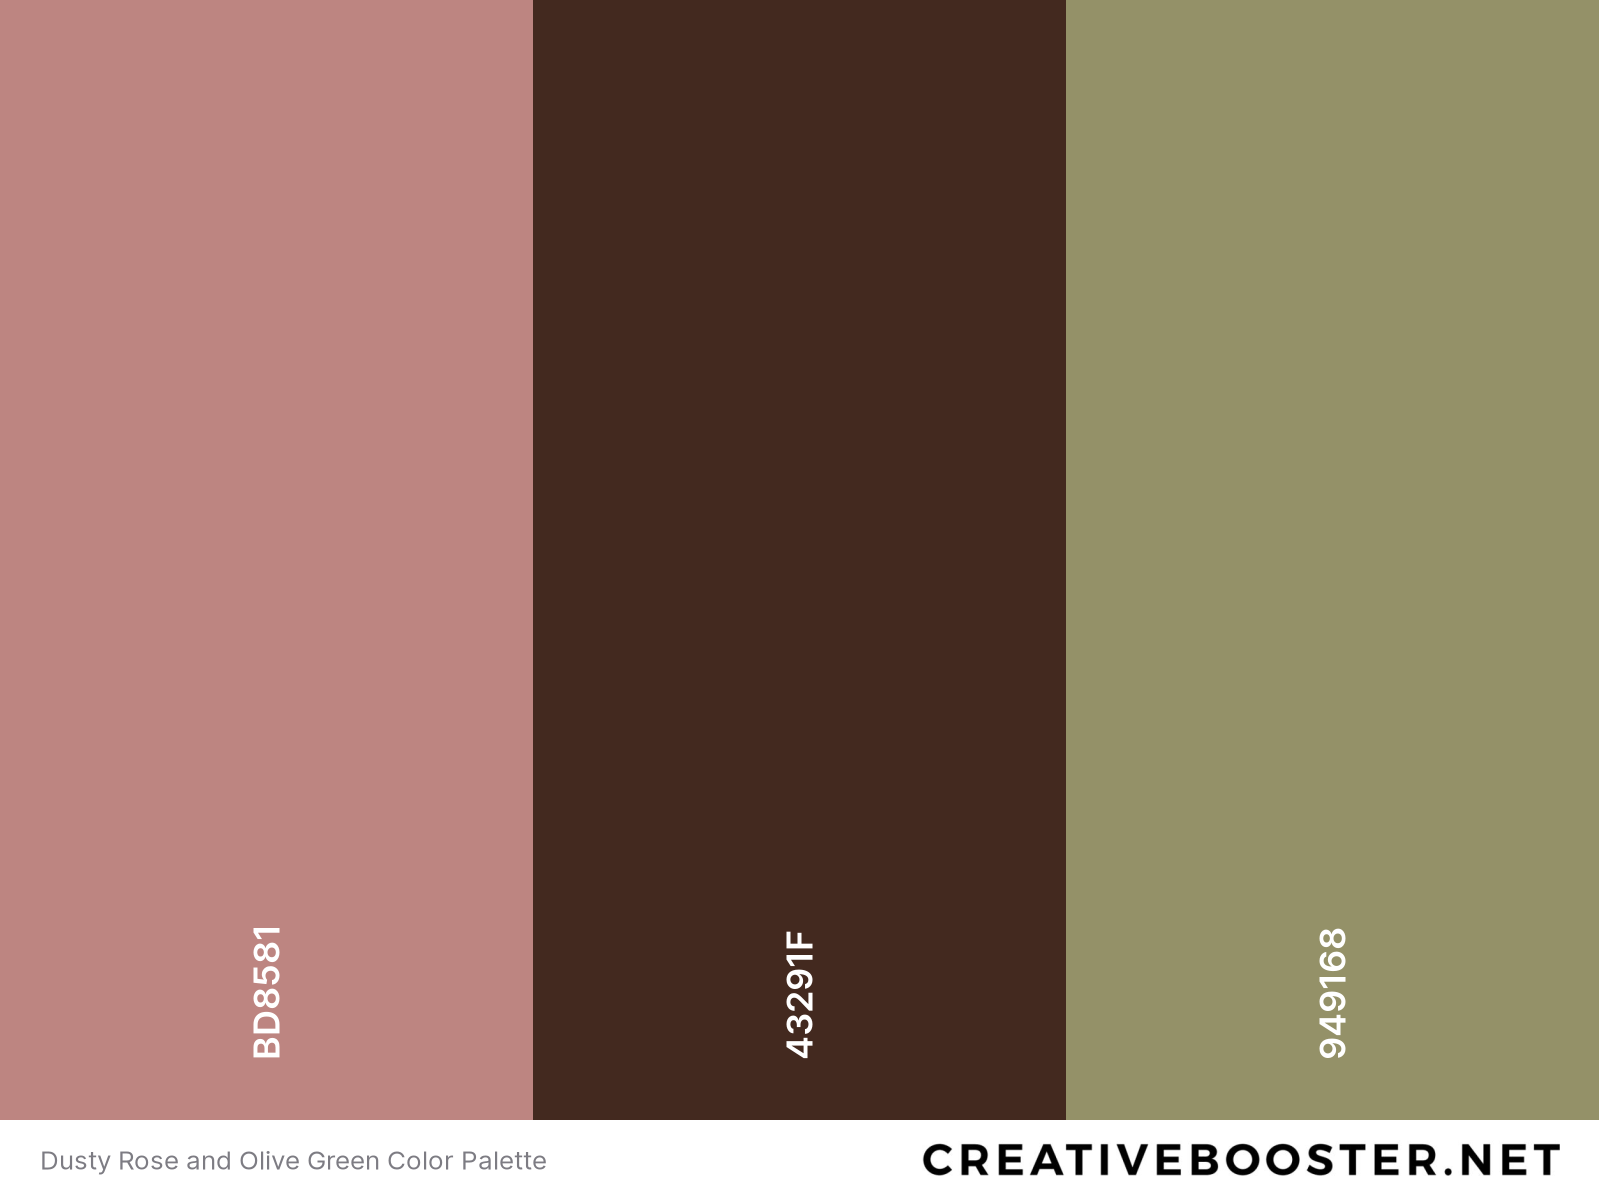 Dusty Rose and Olive Green Color Palette